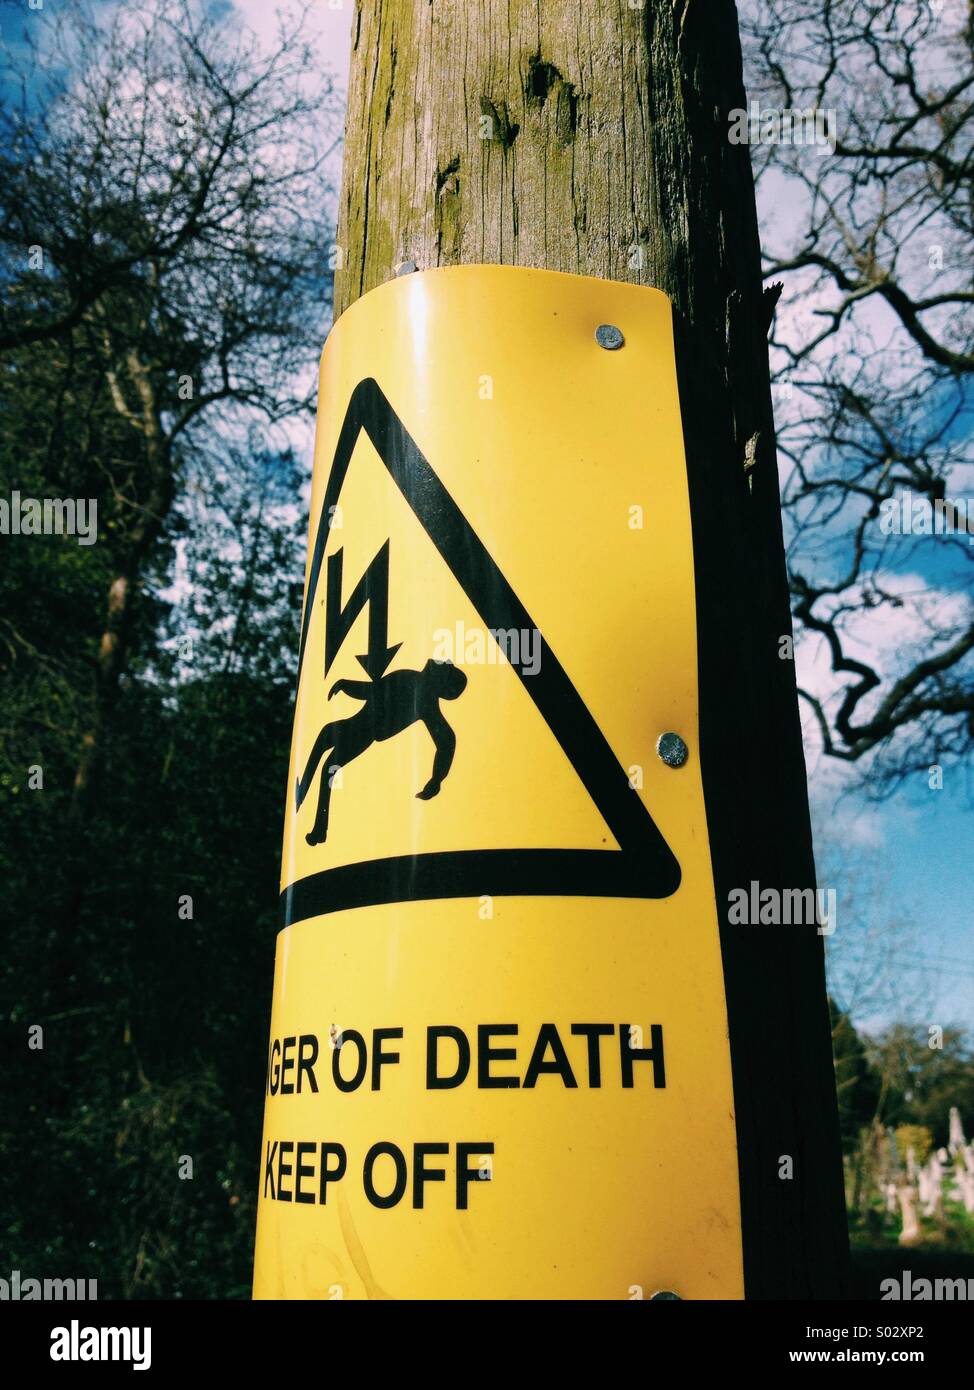 Warning sign of electric shock in wood utility pole Stock Photo